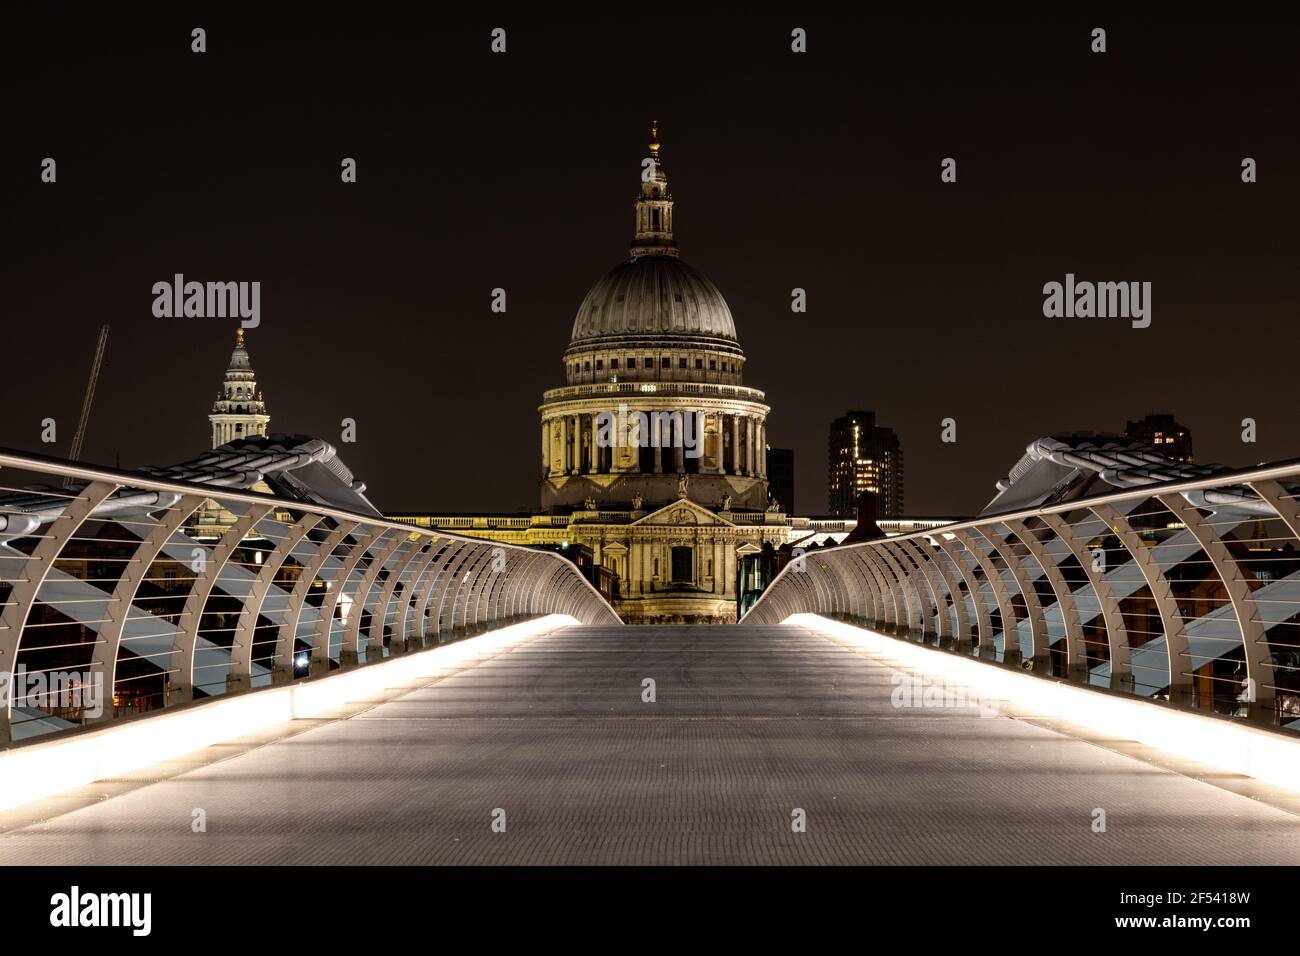 St Pauls Cathedral, London taken from the Millennium Bridge at night time with nobody around Stock Photo